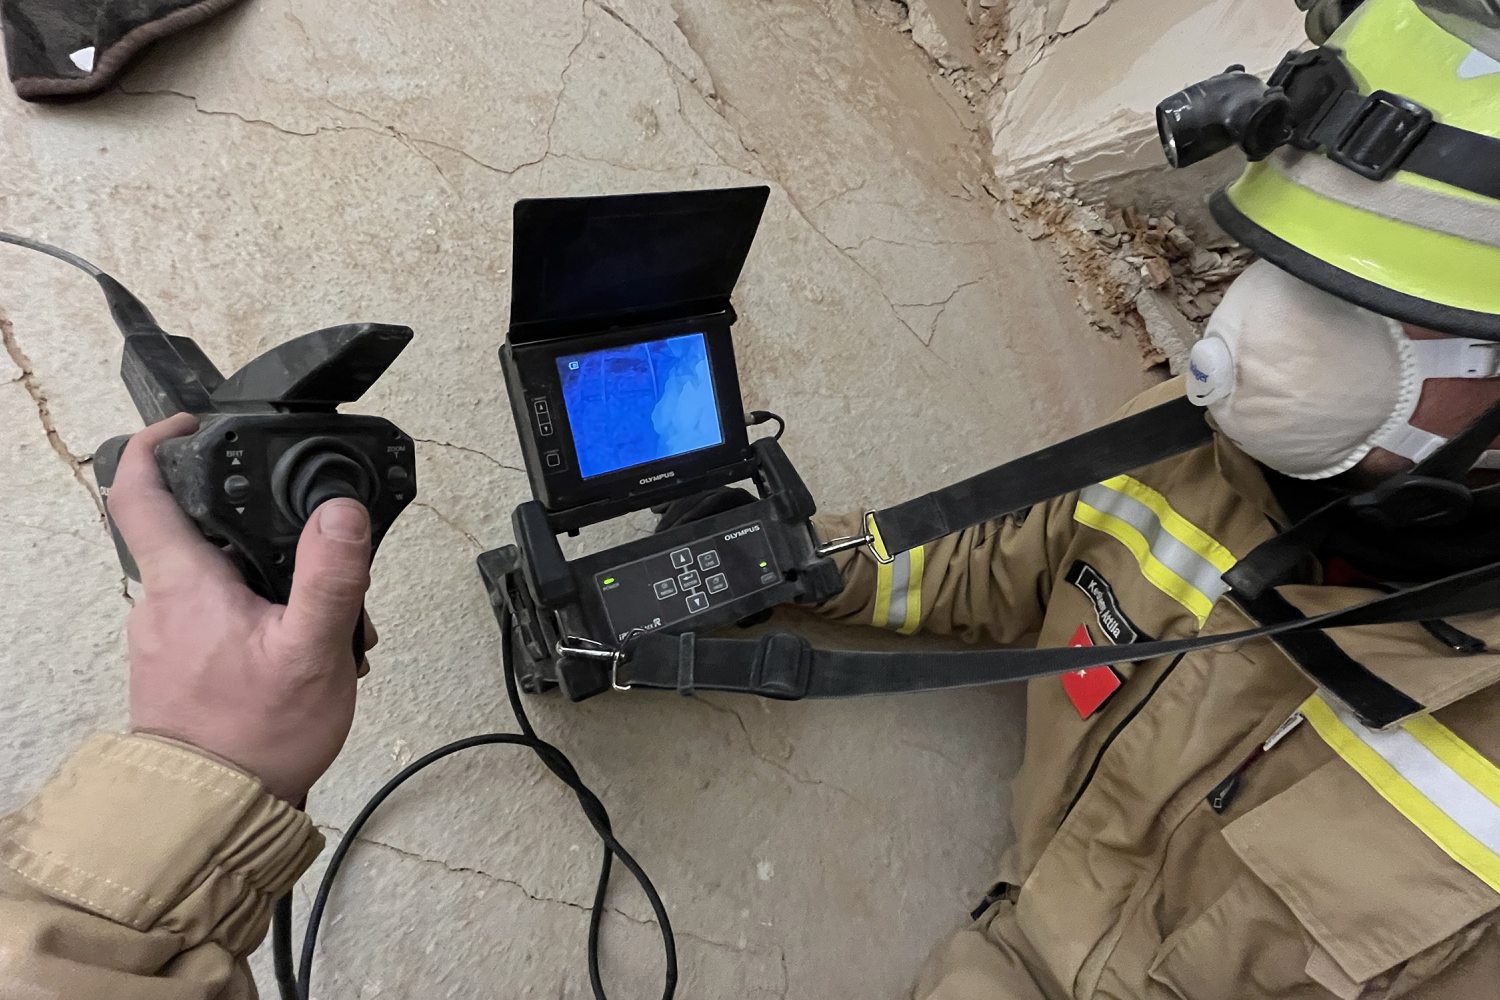 The device the Hungarian rescue team uses to detect people under the rubble